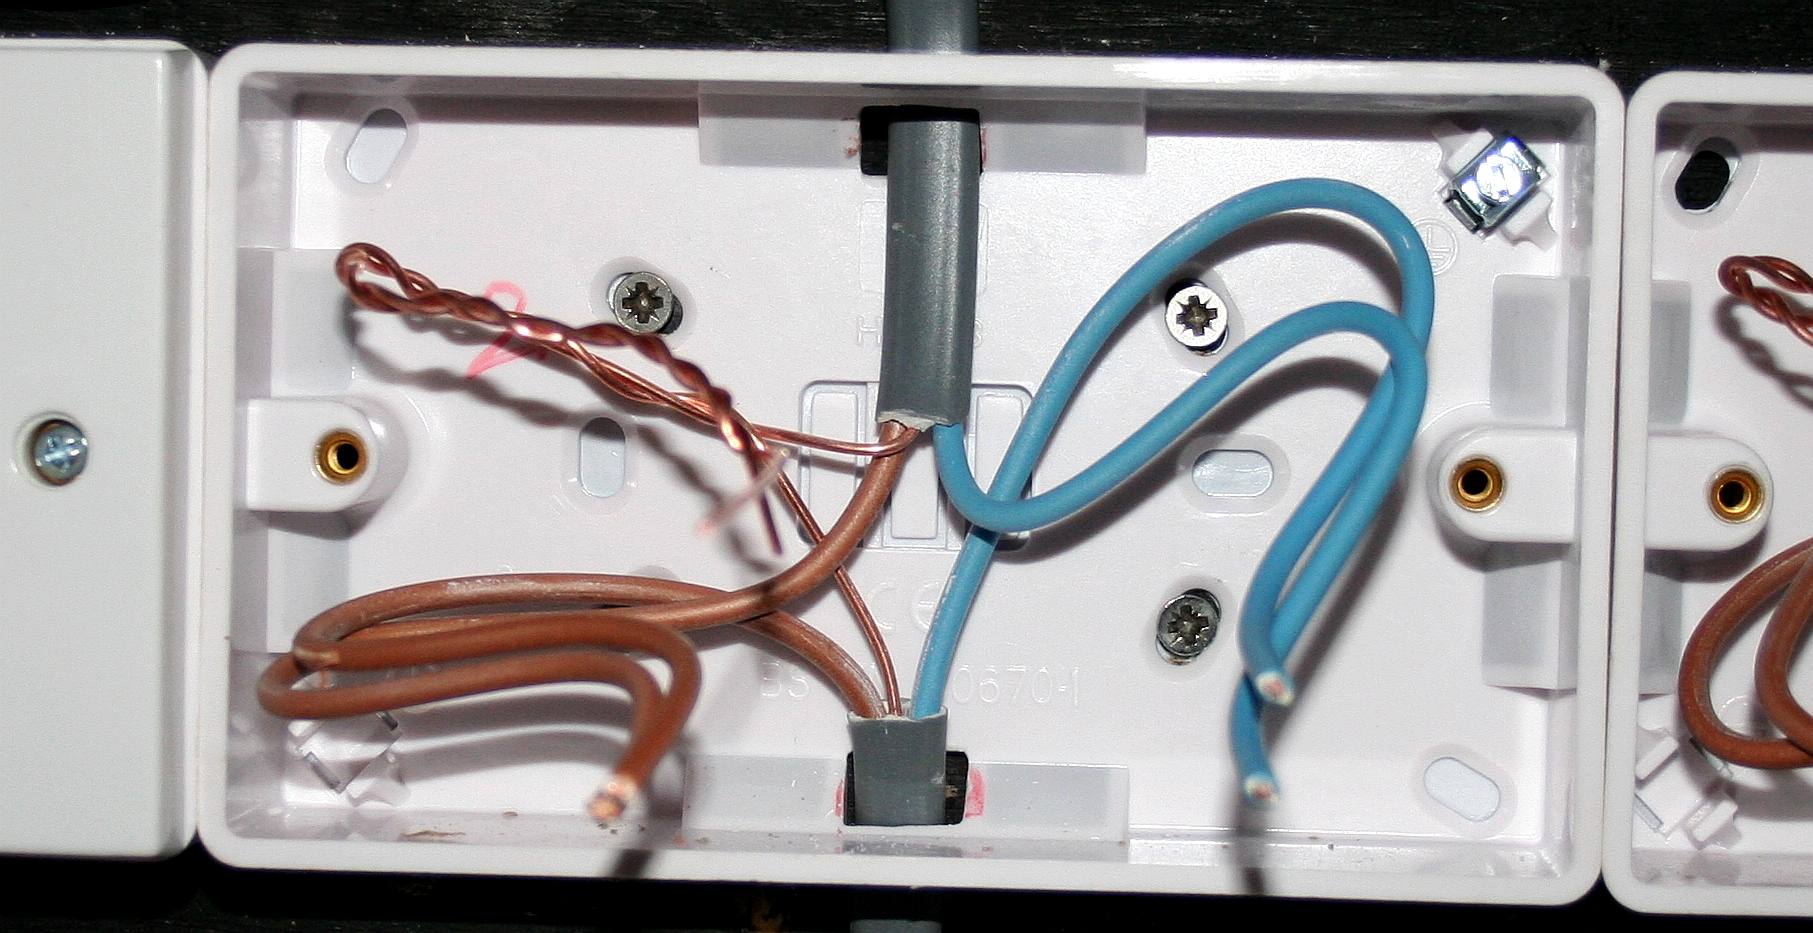 How to wire a dual 13 amp plu socket correctly